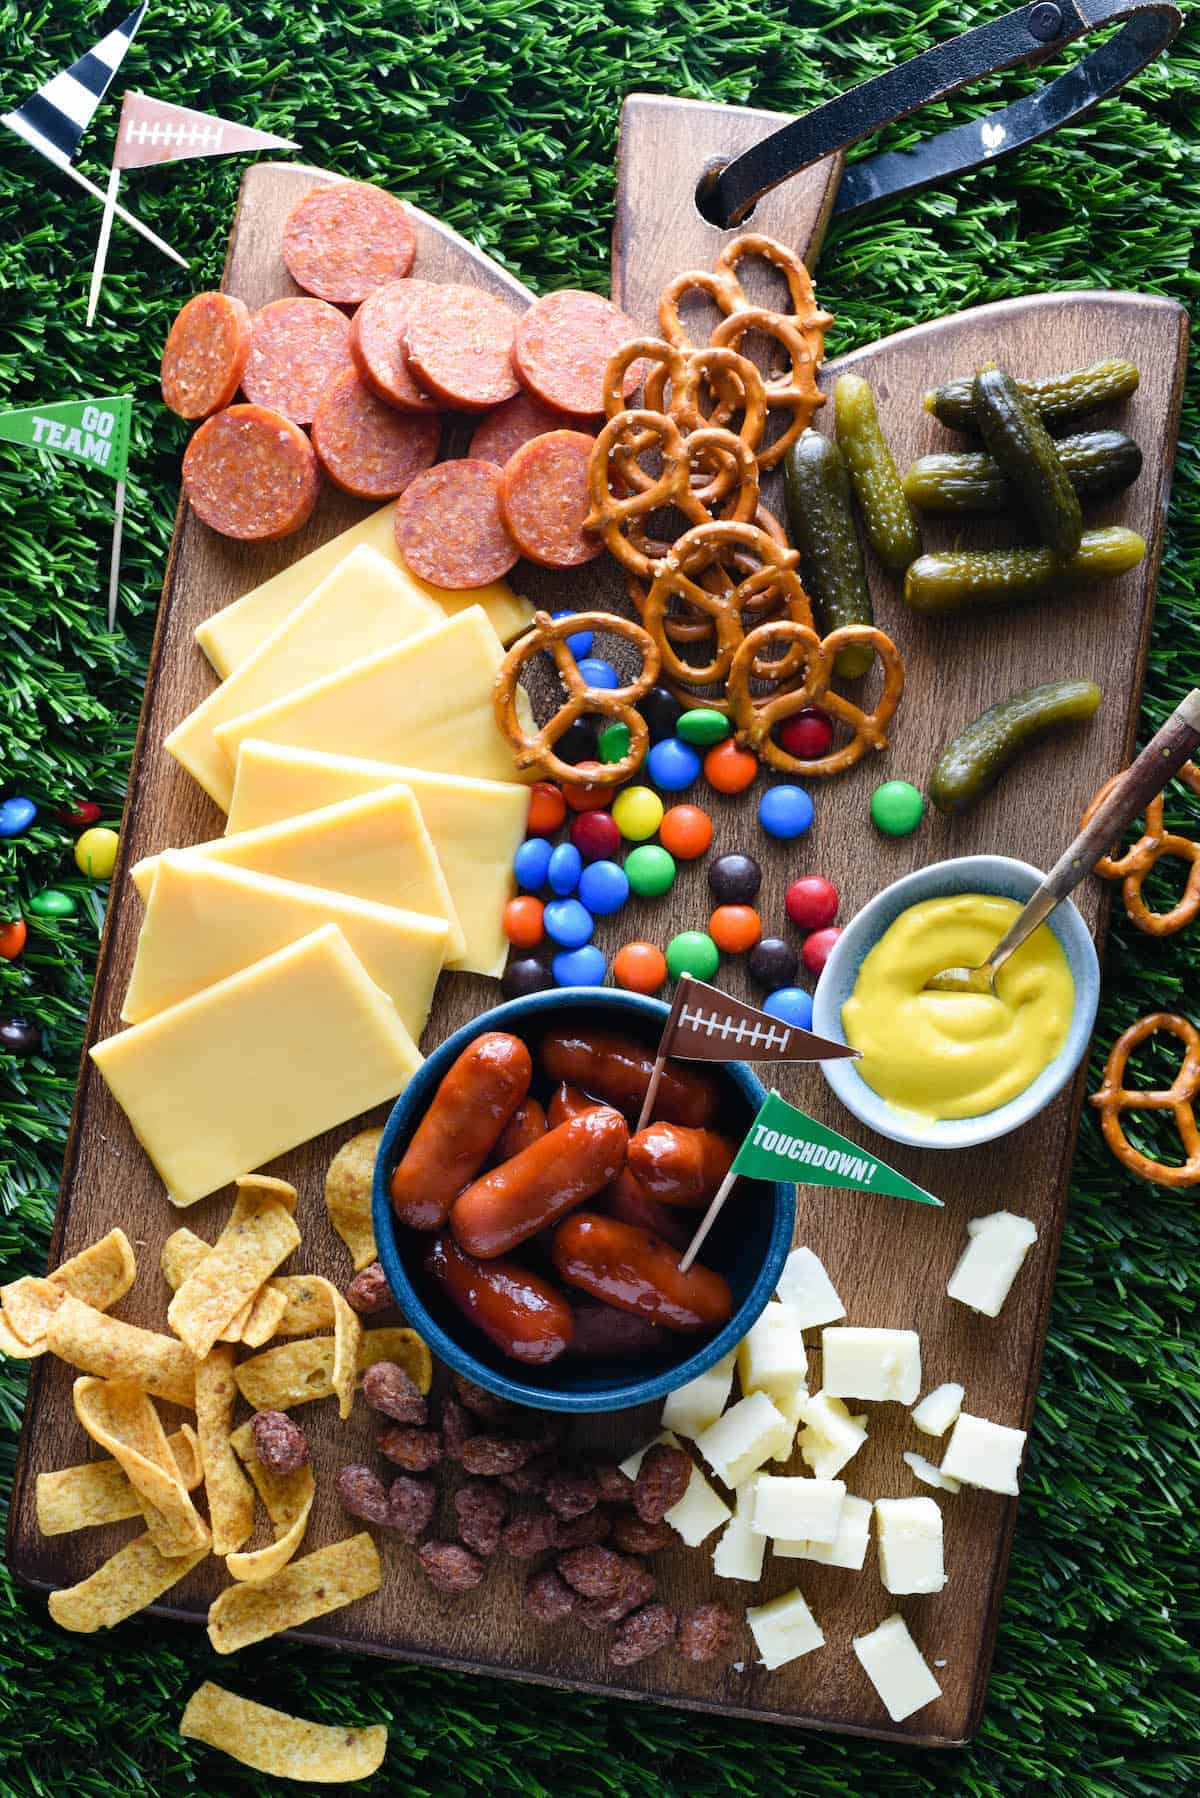 Assorted snacks on a wooden board including cheese, sausages, pretzels, pickles, and dips, arranged for a sports-themed party.